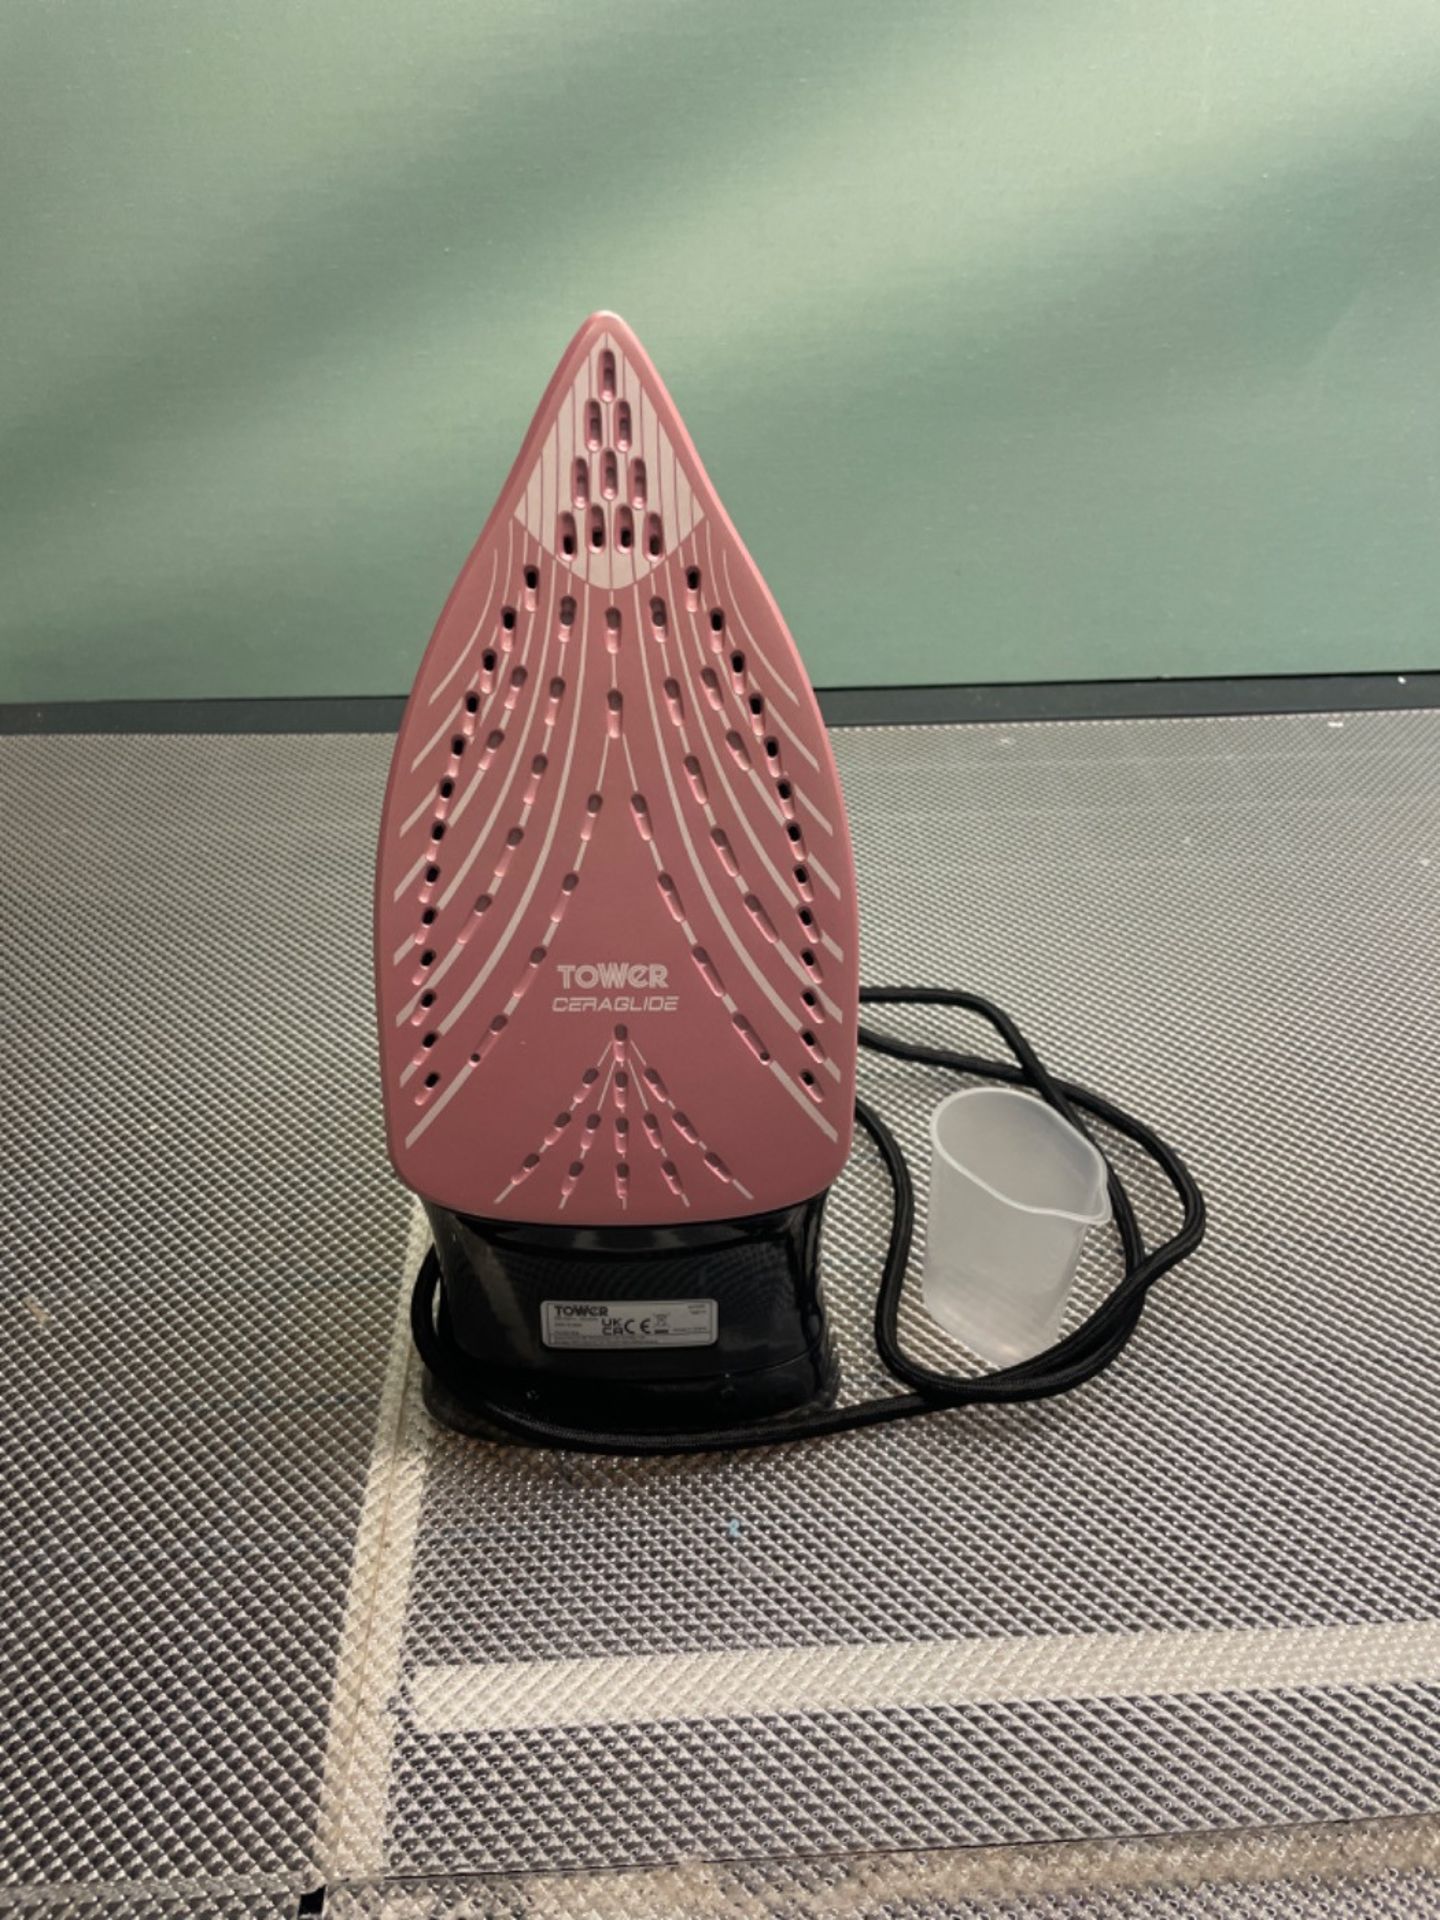 Tower T22013 CeraGlide Steam Iron, Ceramic Sole Plate, 3100 W, Rose Gold and Black. - Image 3 of 3